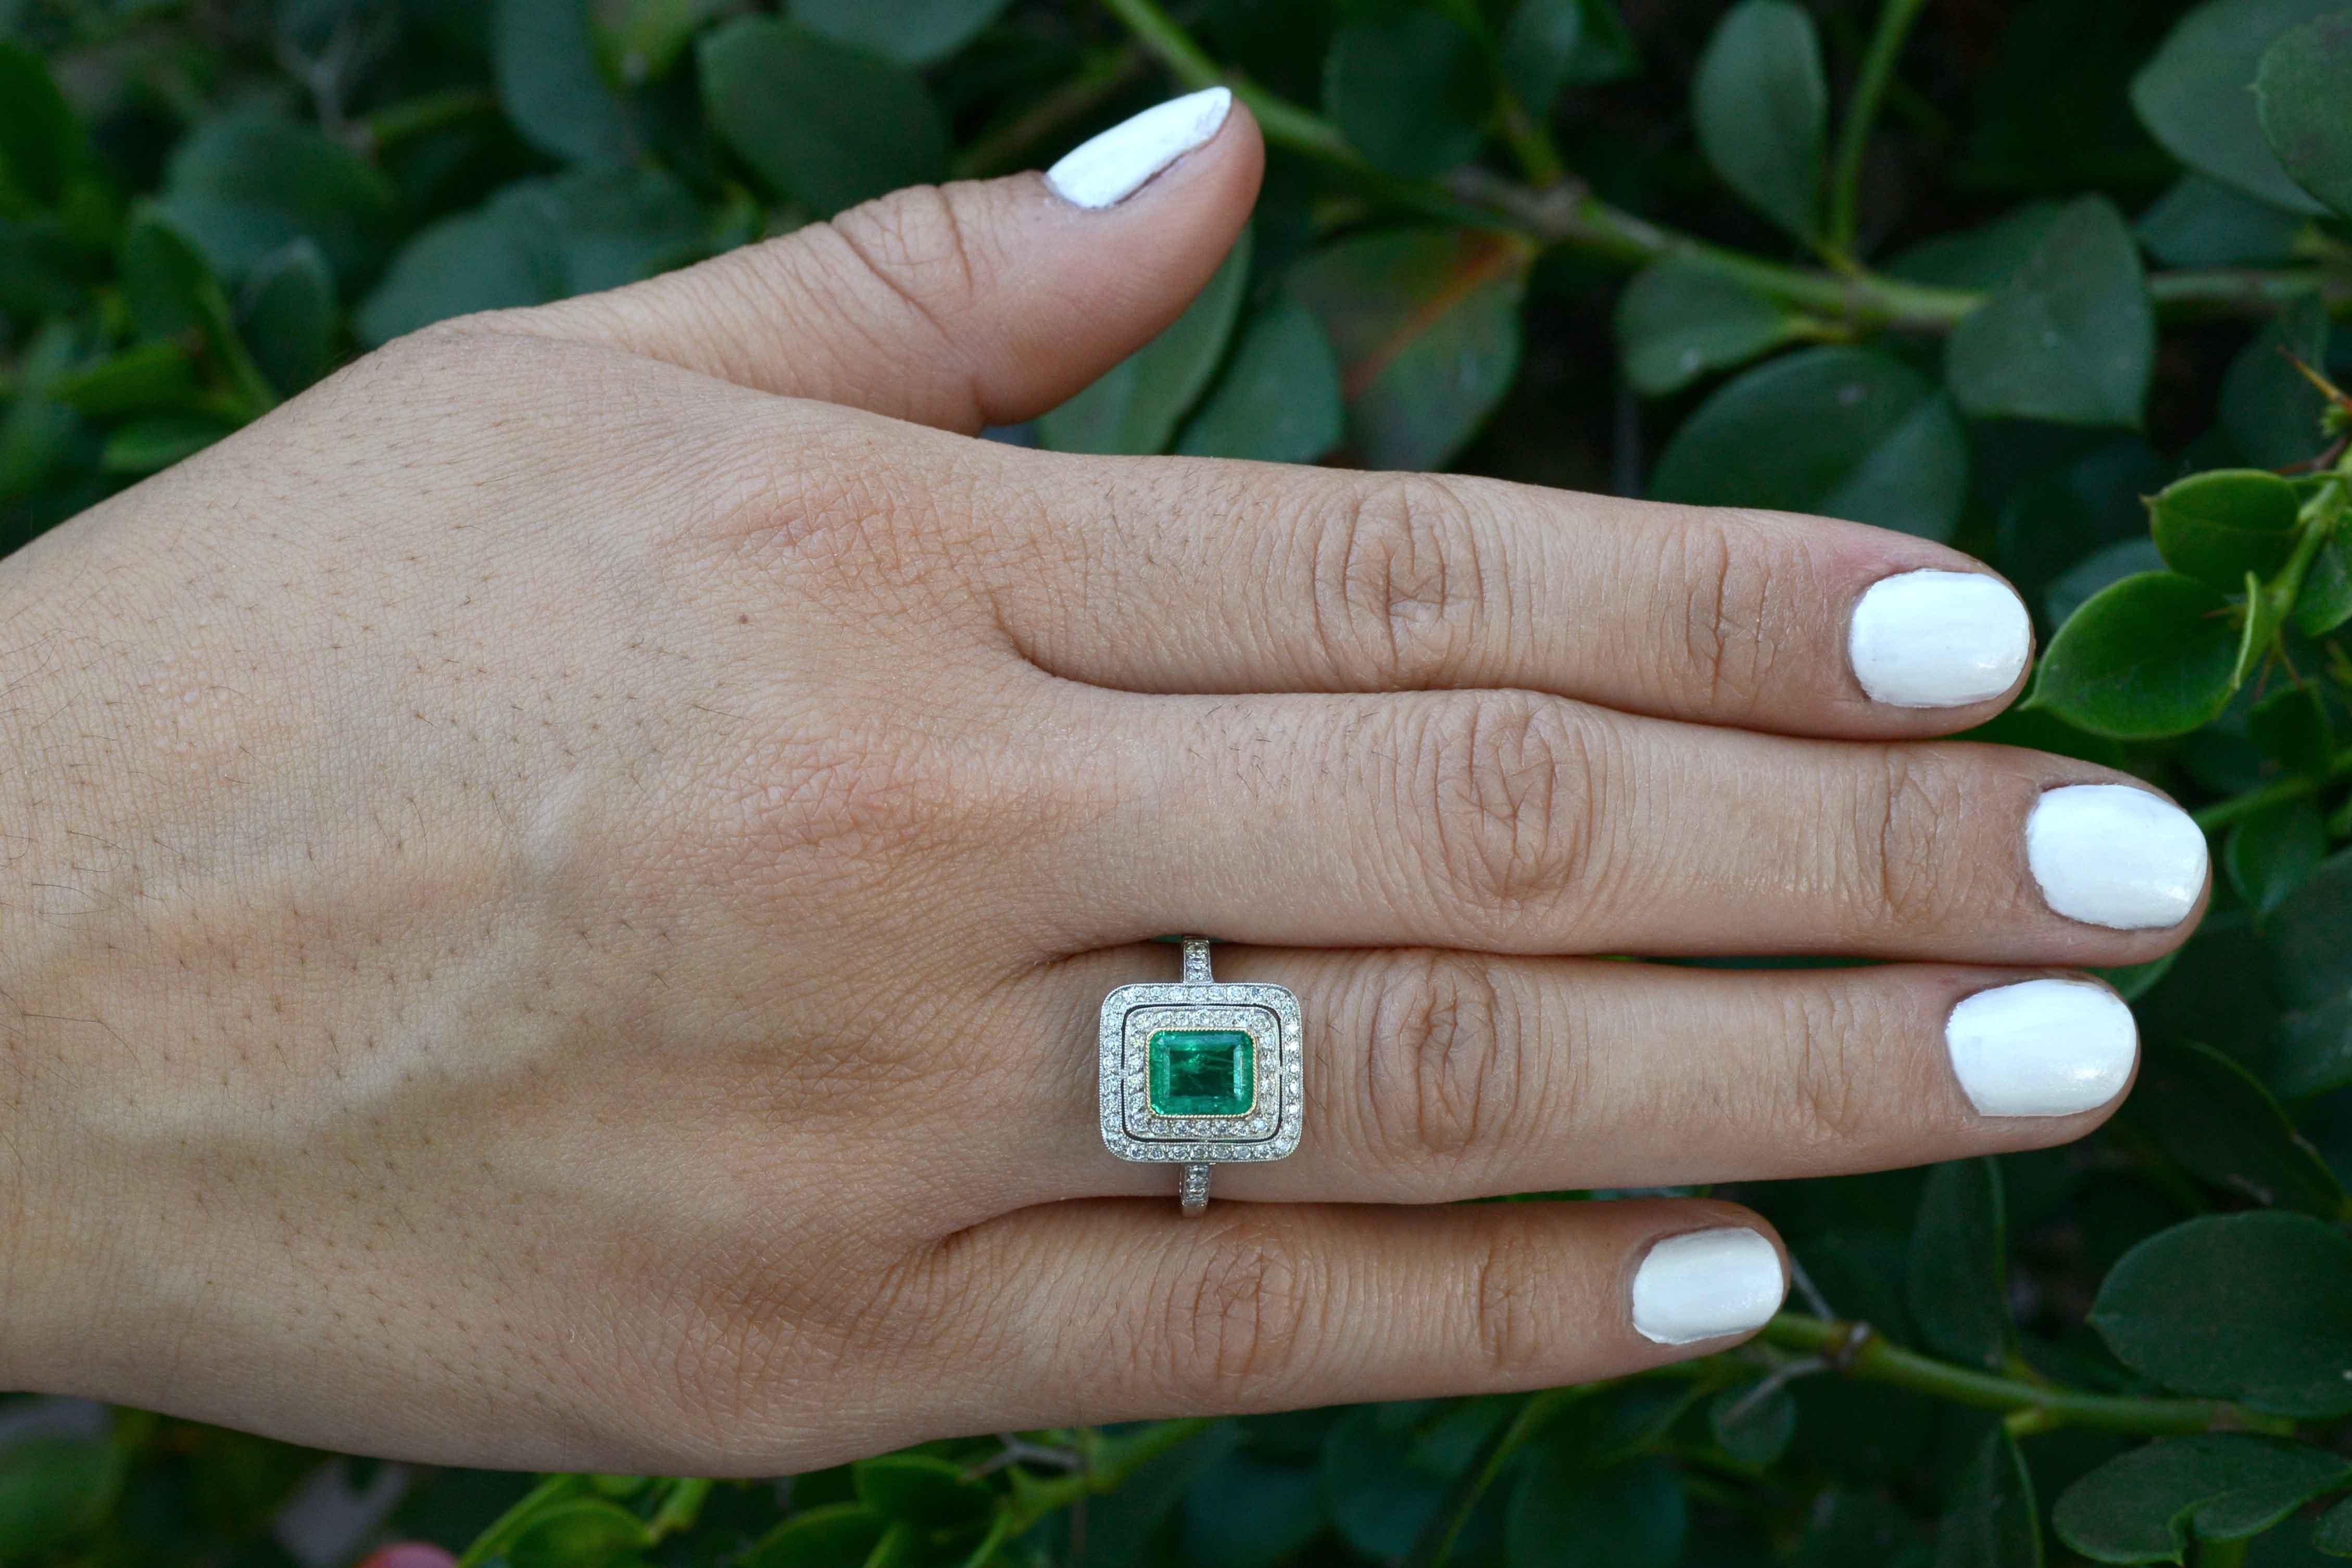 A dazzling Colombian Emerald takes center stage in this platinum engagement ring. The rich, vibrant , richly saturated green of the gemstone, set in a bezel of rich 18K yellow gold really POPS in the double pave' diamond halo. It seems to float in a